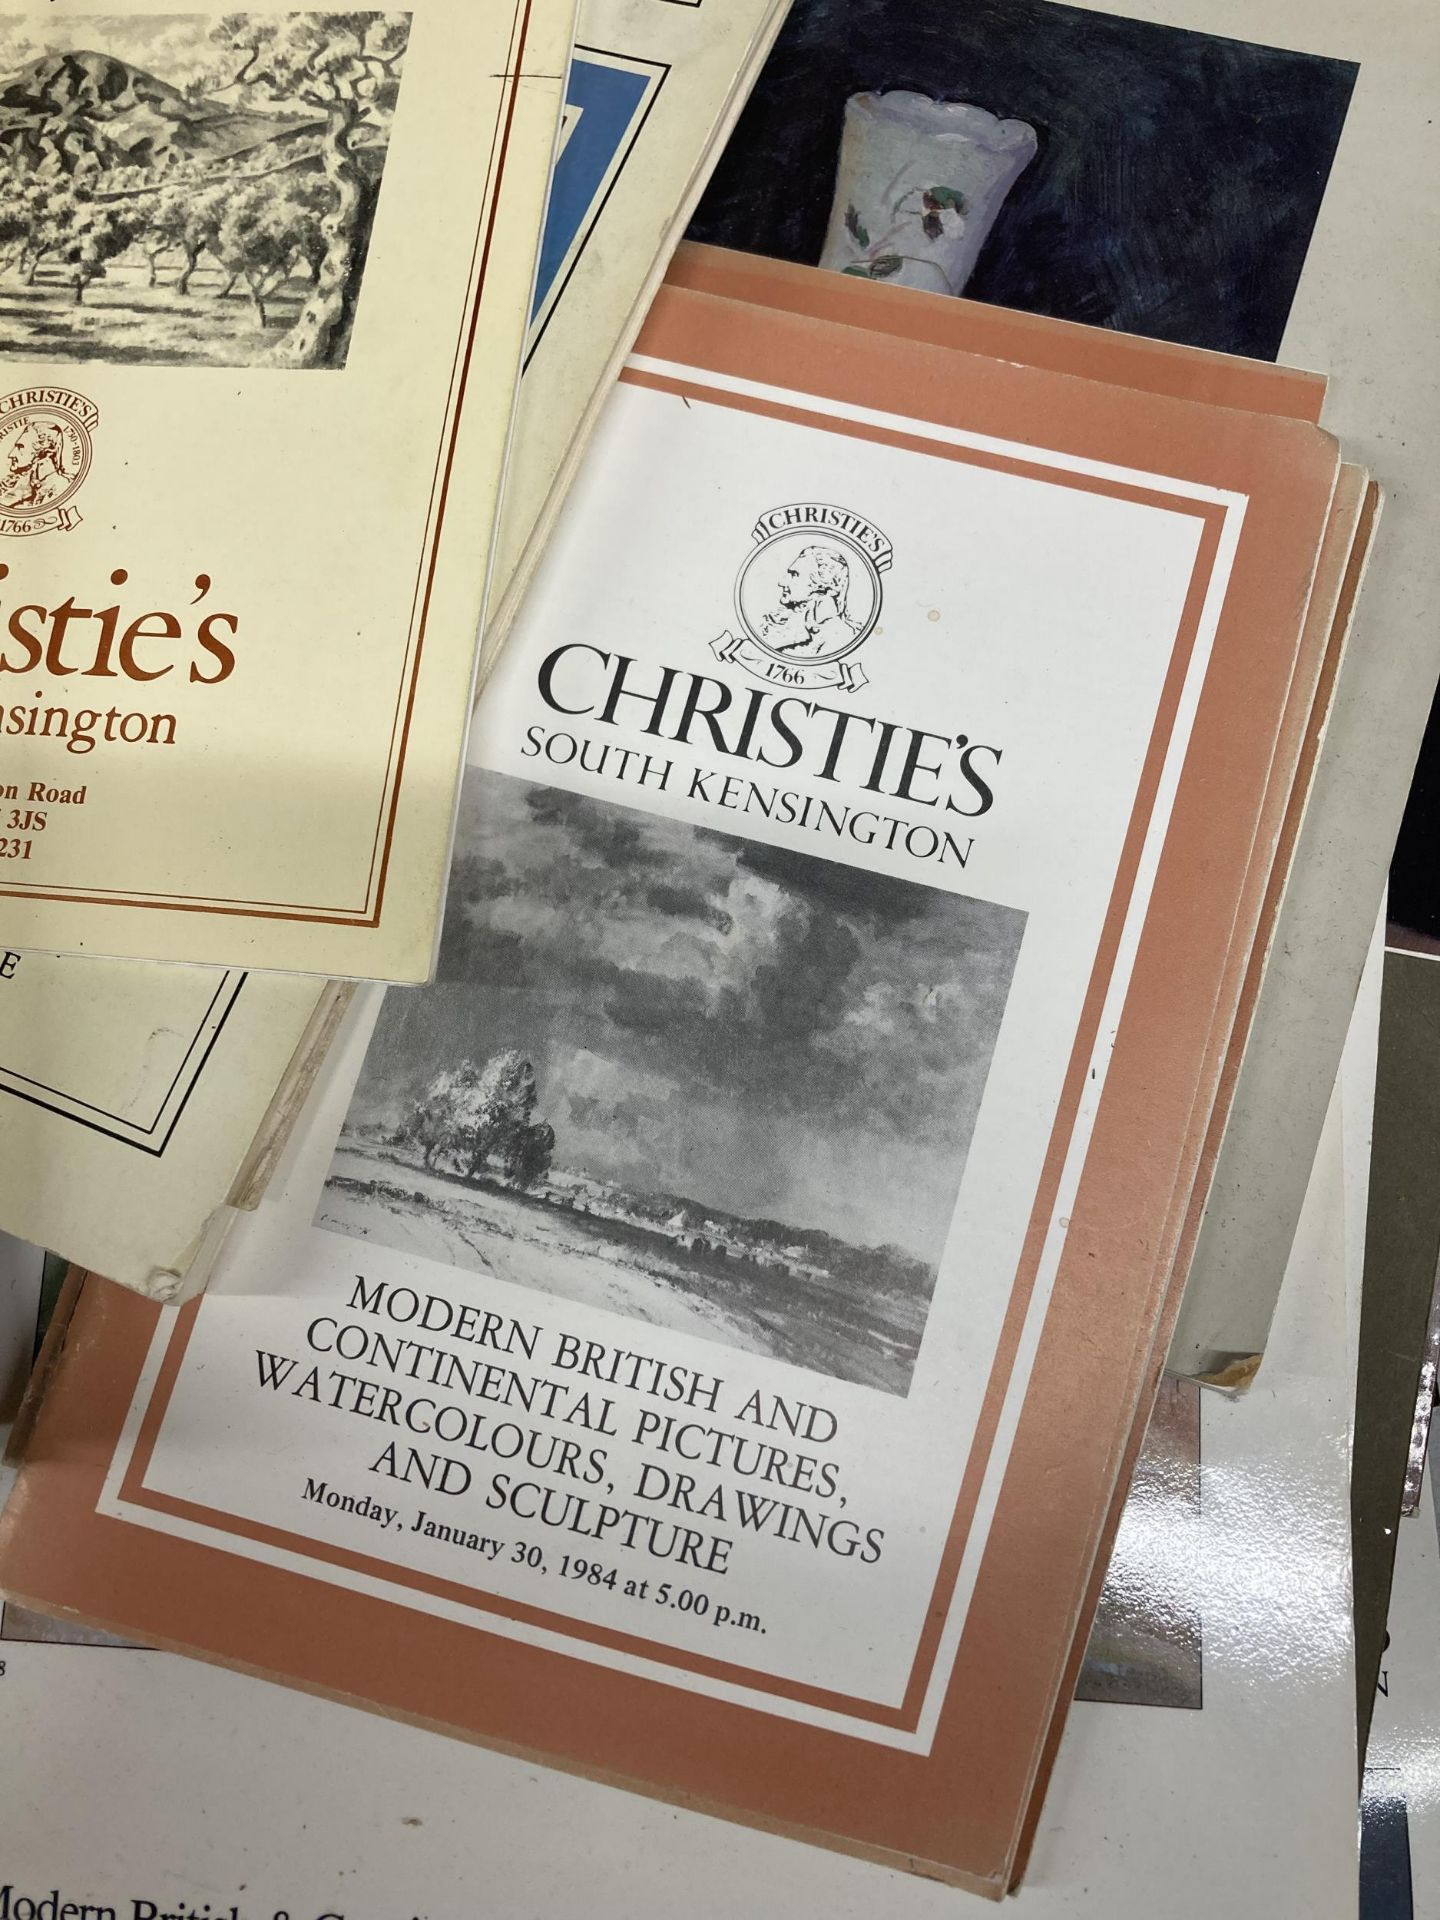 A LARGE AMOUNT OF VINTAGE AUCTION CATALOGUES TO INCLUDE CHRISTIES, SOTHEBY'S, ETC - Image 2 of 5